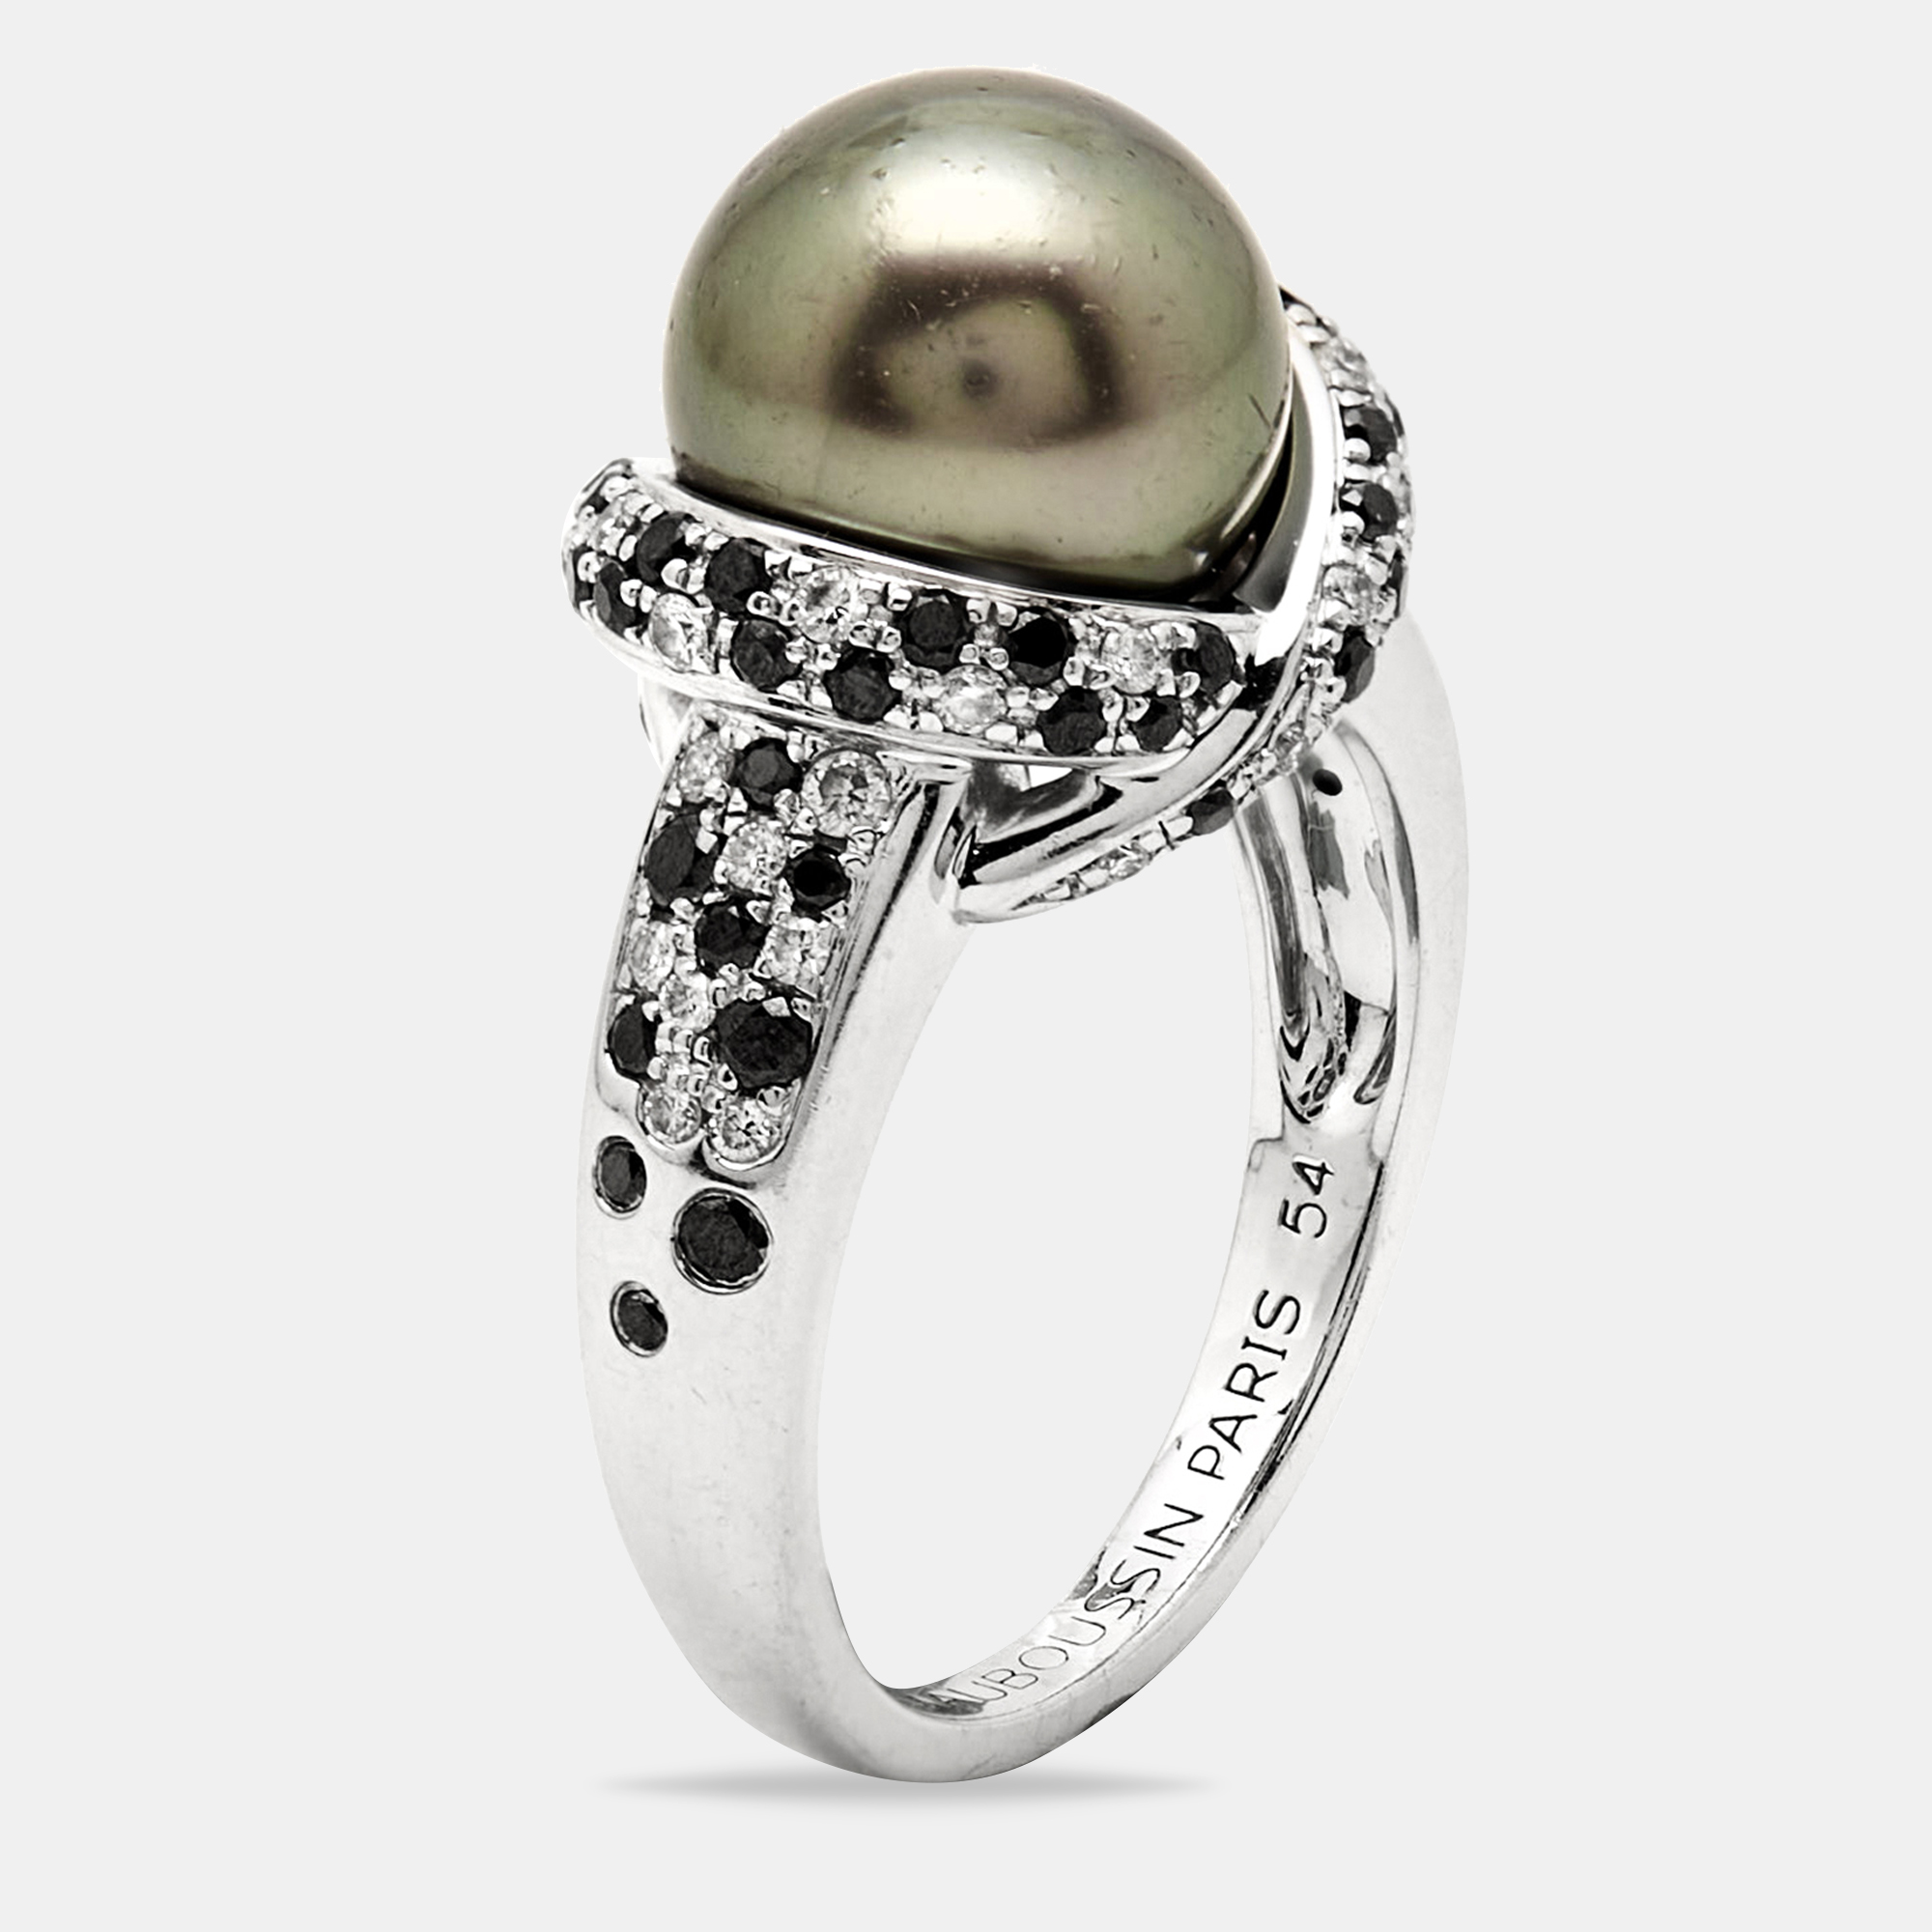 

Mauboussin Perle Caviar Mon Amour Cultured Pearl Diamond 18K White Gold Cocktail Ring Size